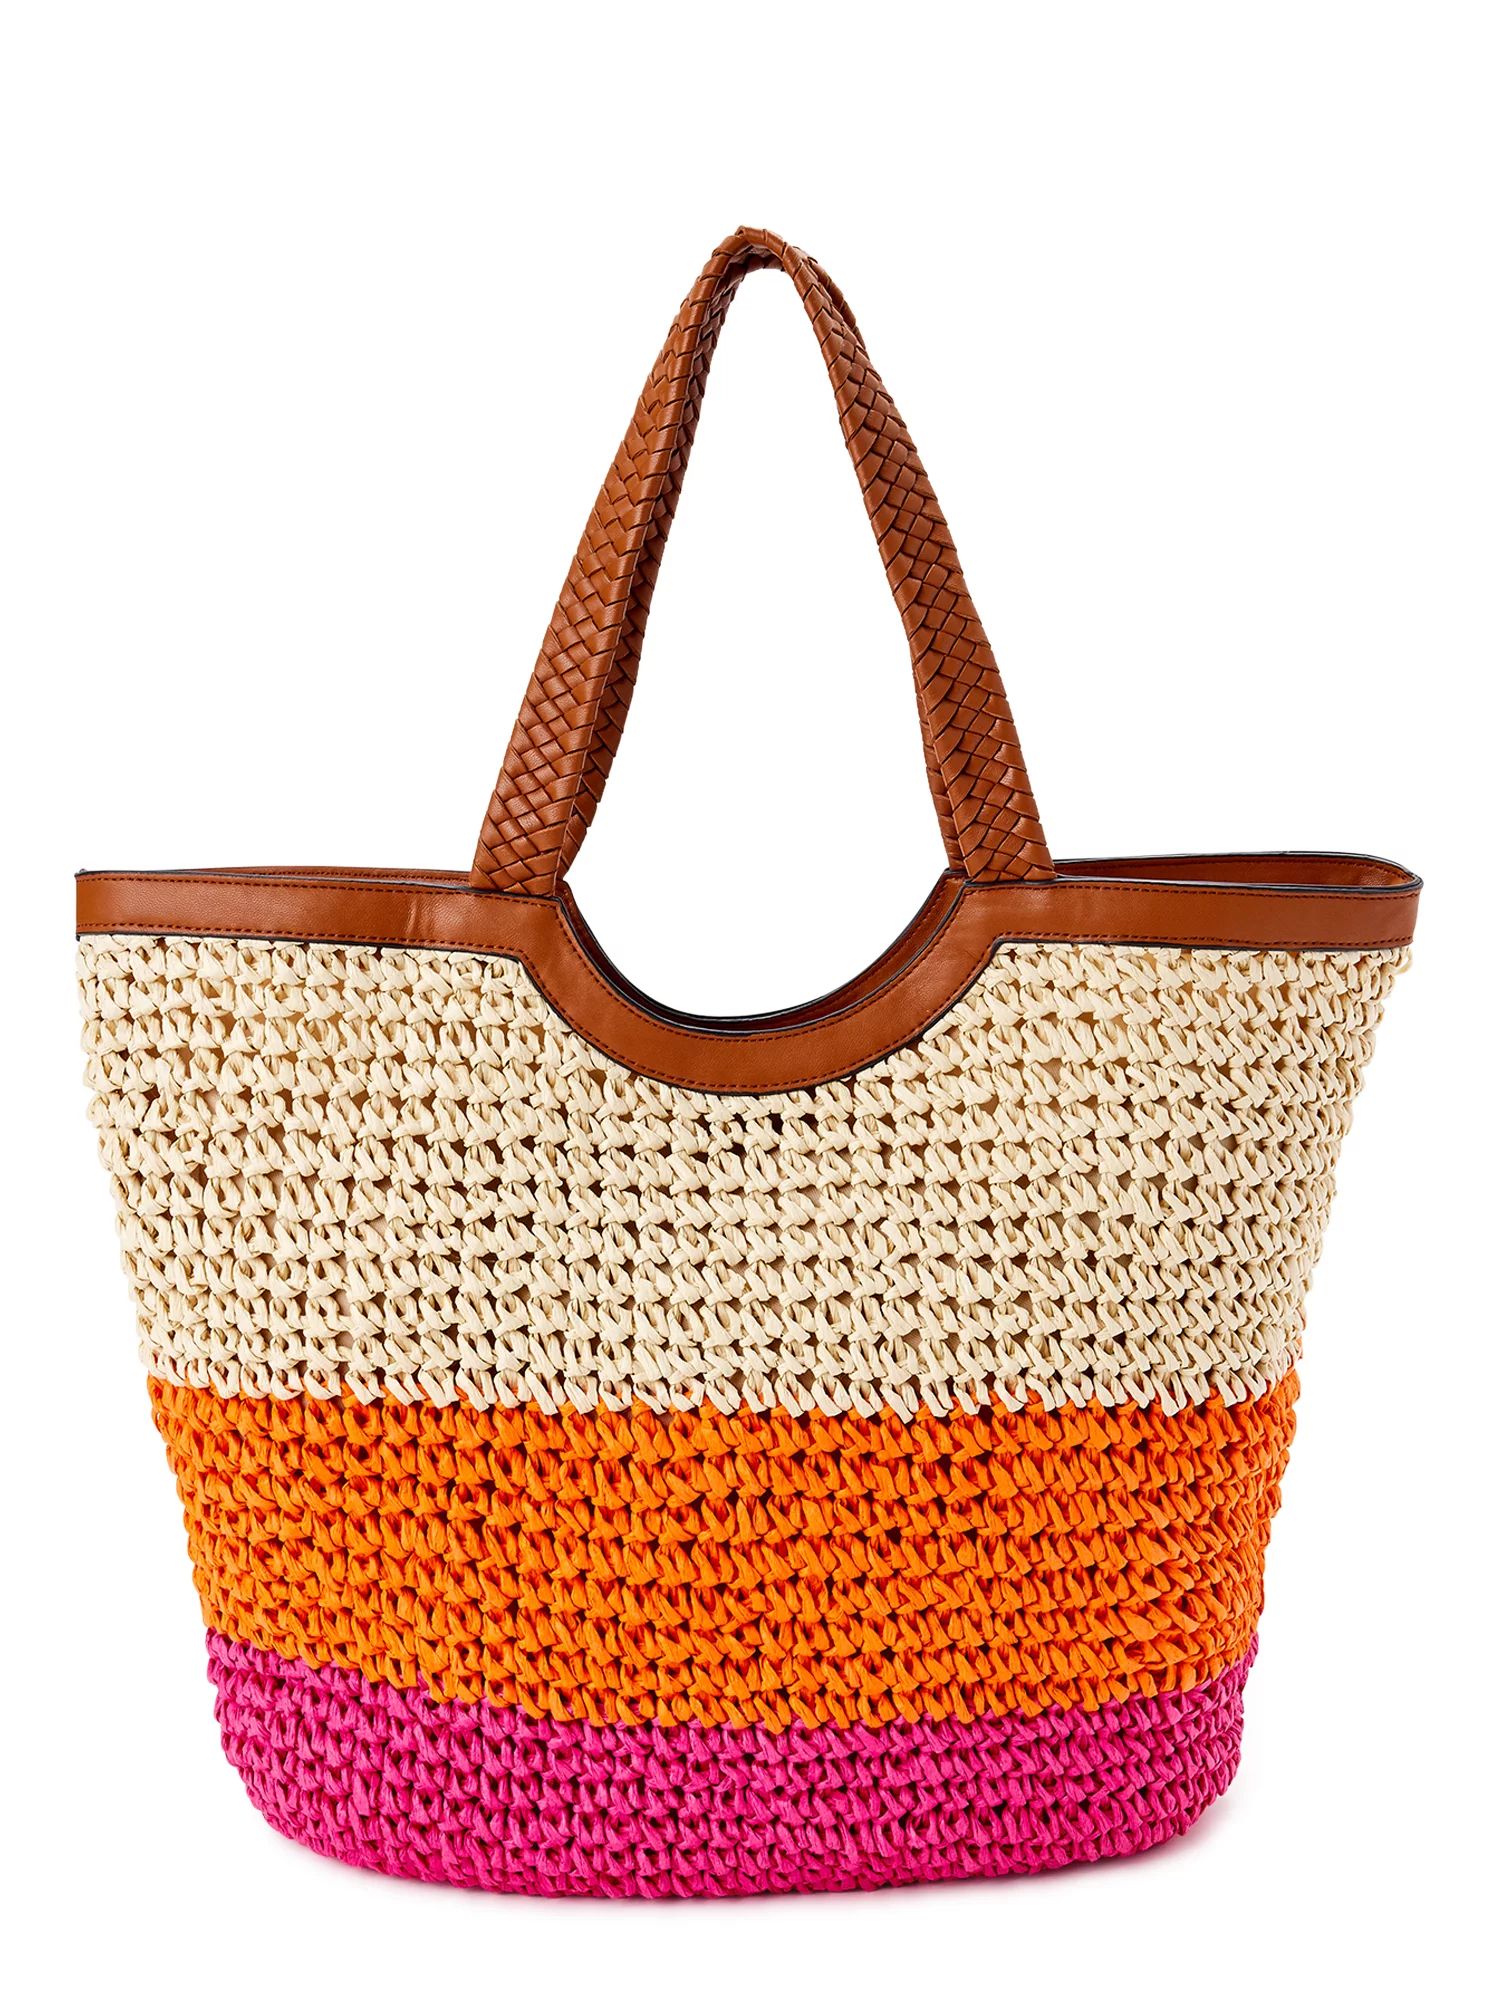 Time and Tru Extra Large Woven Straw Beach Travel Tote Bag | Walmart (US)